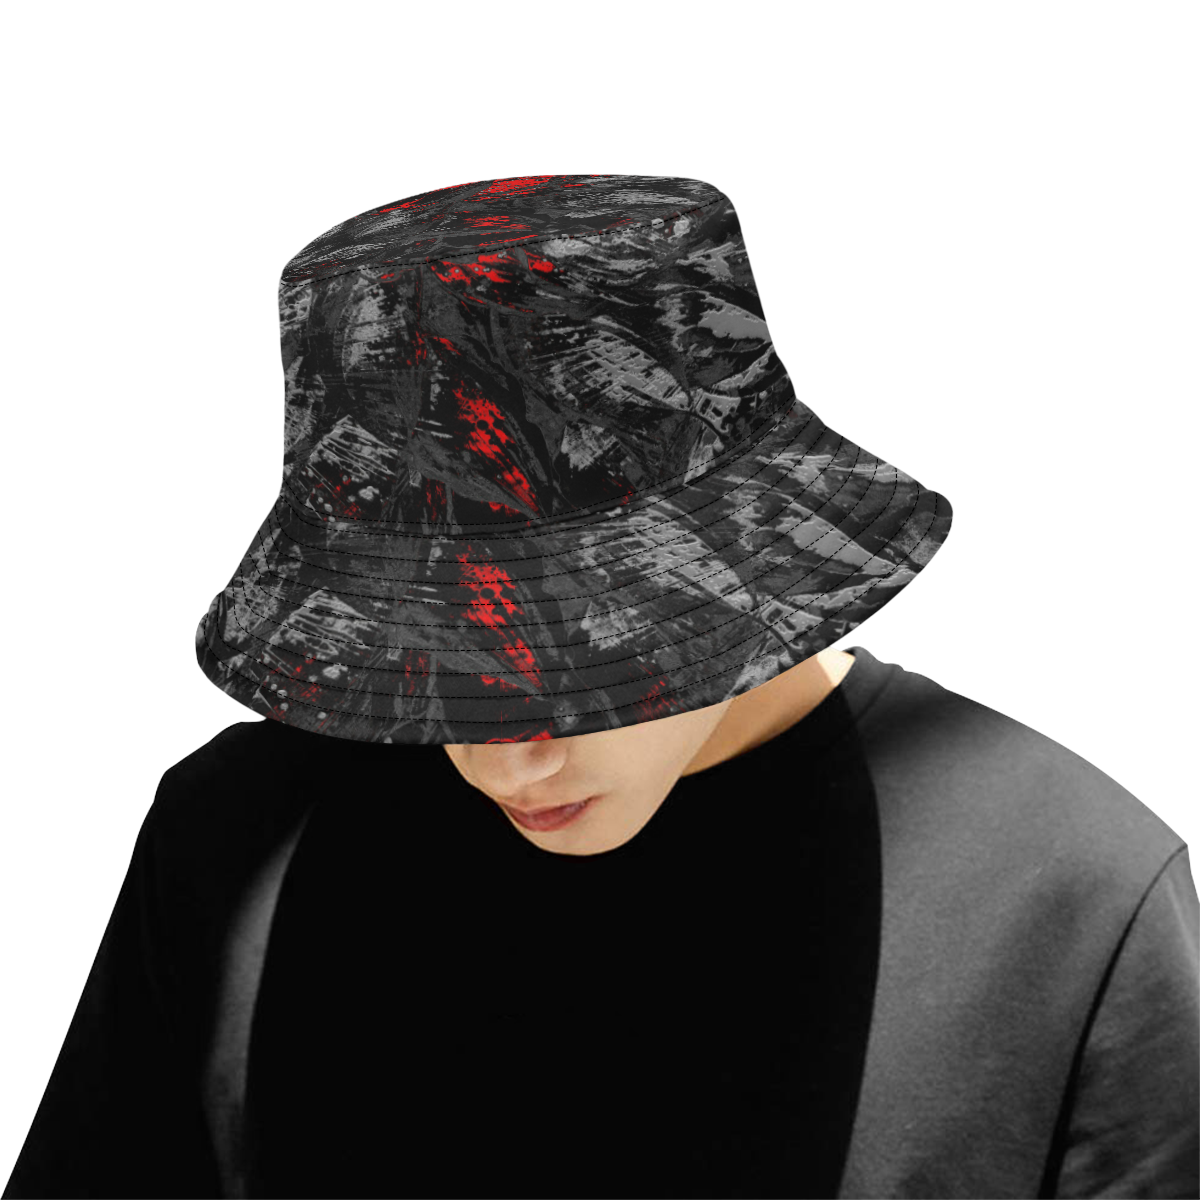 wheelVibe_8500 120 TIGER MADDNESS low All Over Print Bucket Hat for Men